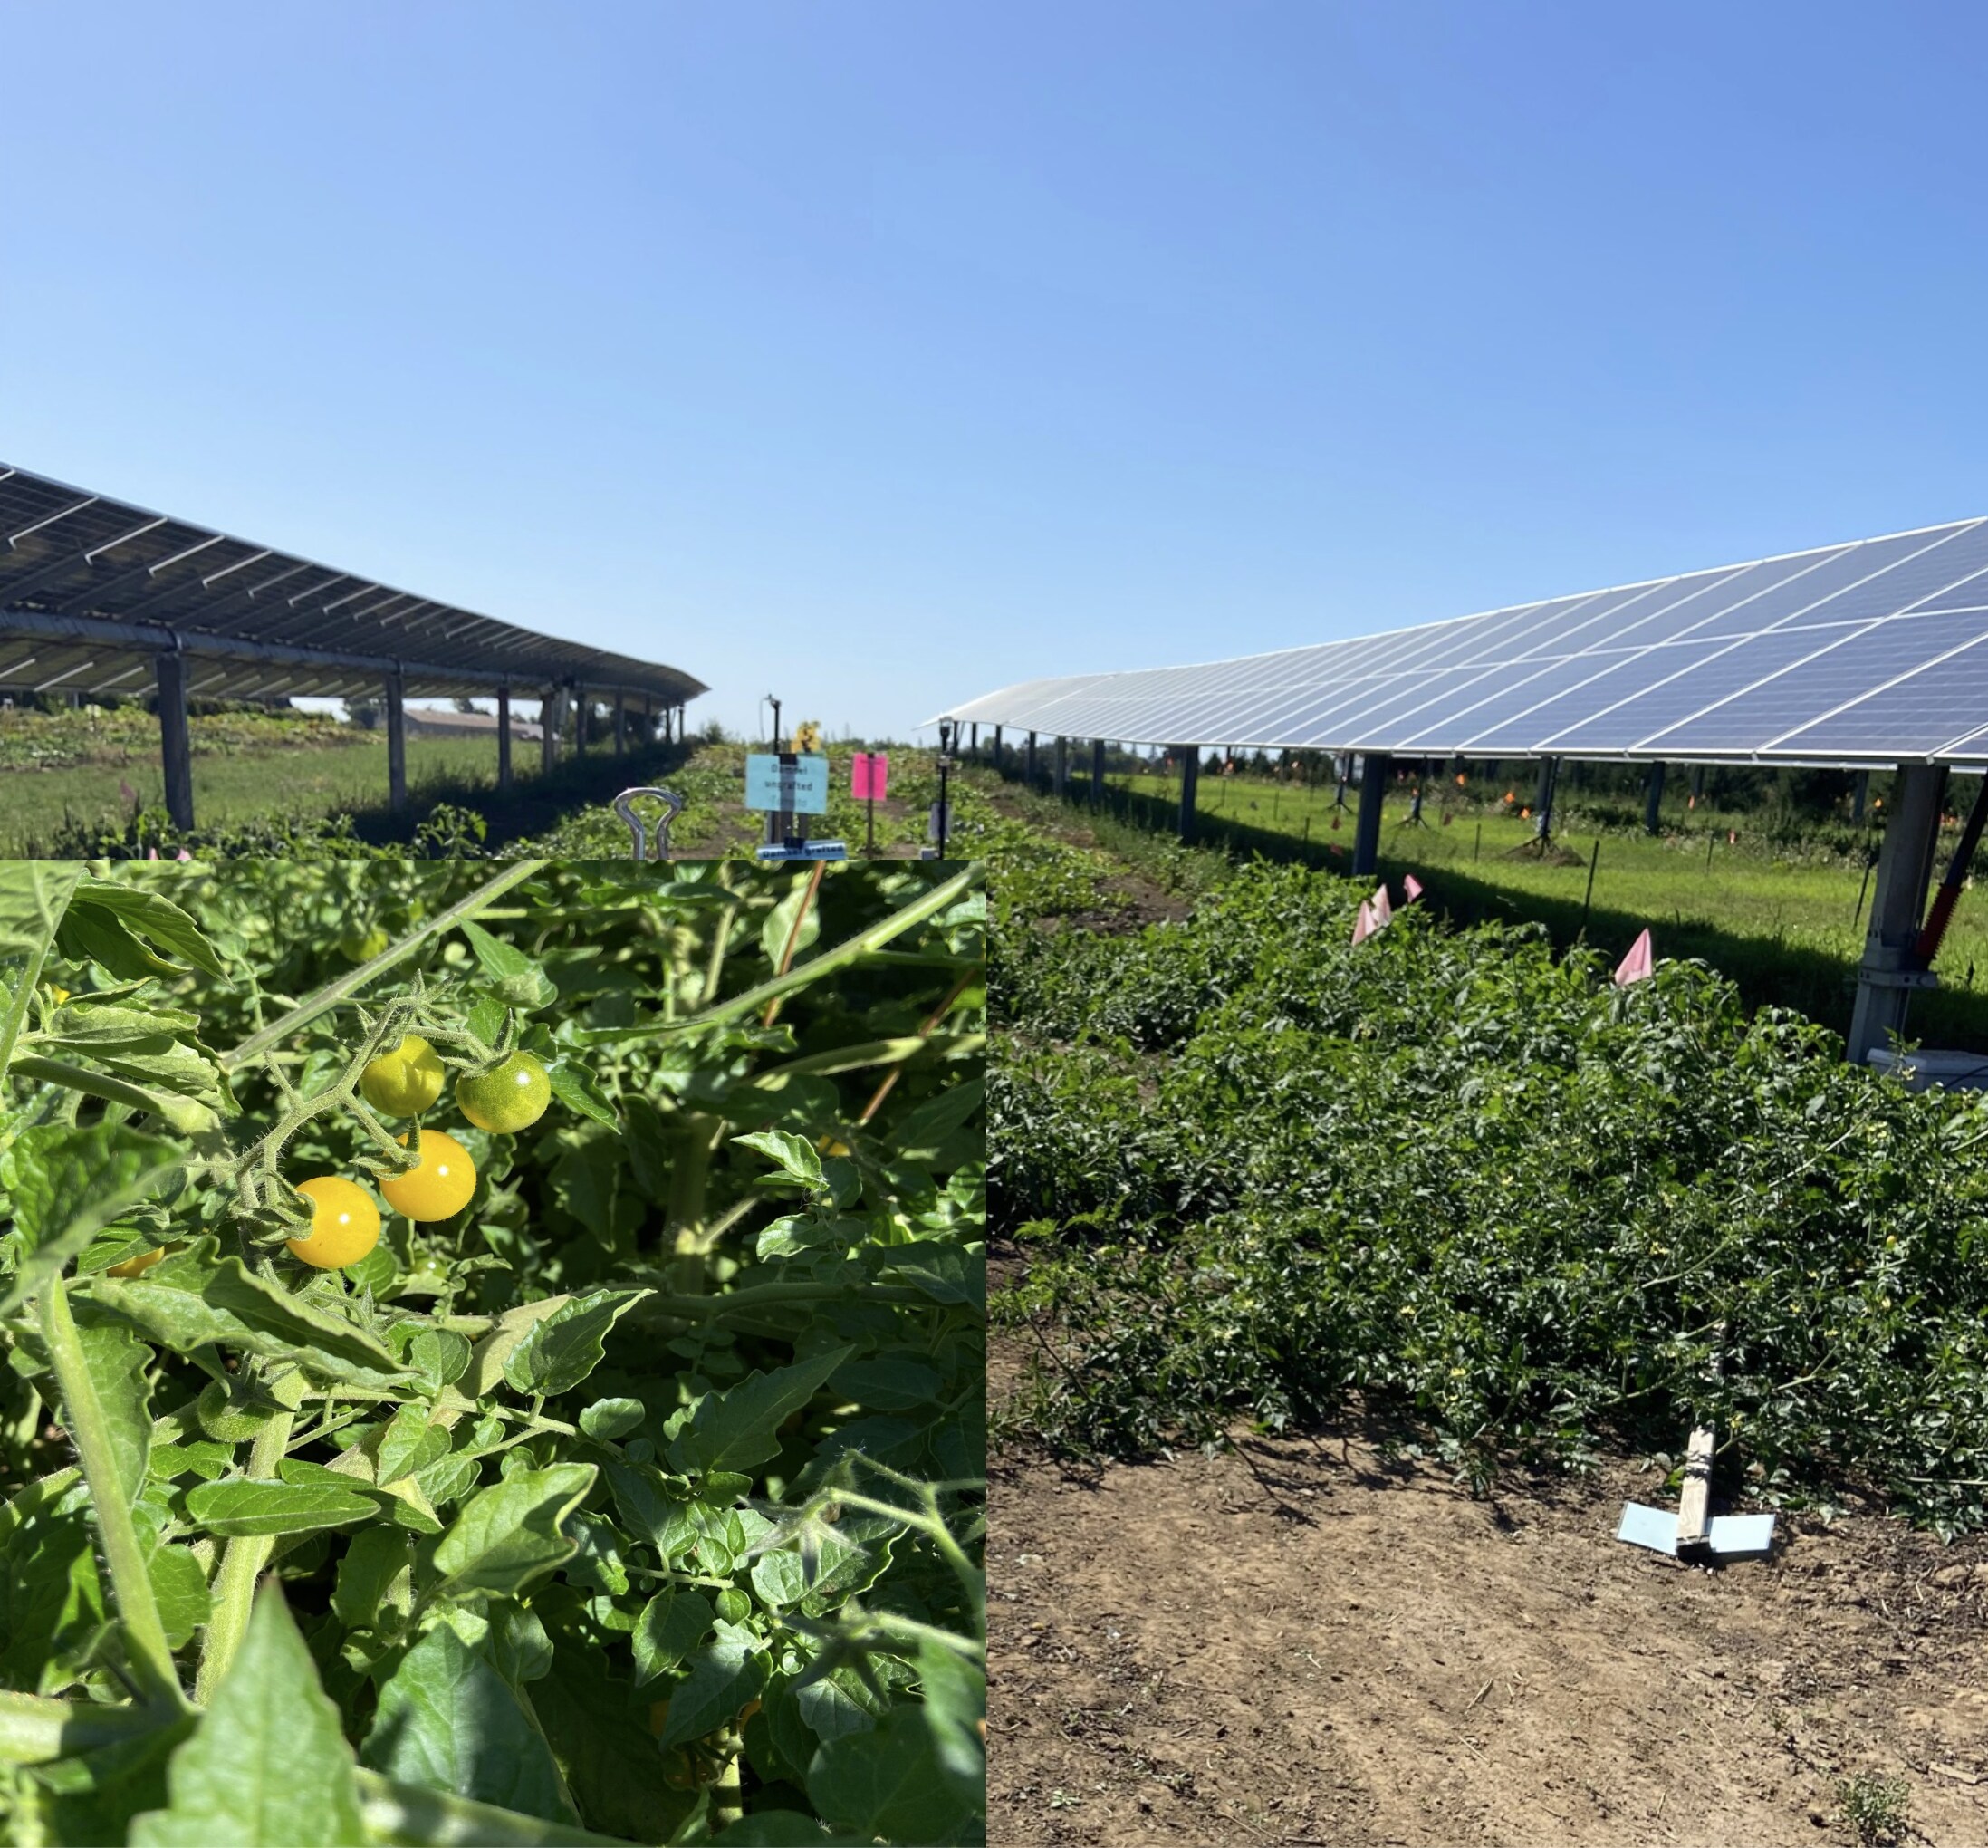 Landscape shot of Oregon Clean Power Co-op’s unique community solar project, two rows of solar panels with crops growing between them. In the bottom right quadrant of the image, it zooms in to show green/yellow cherry tomatos growing.